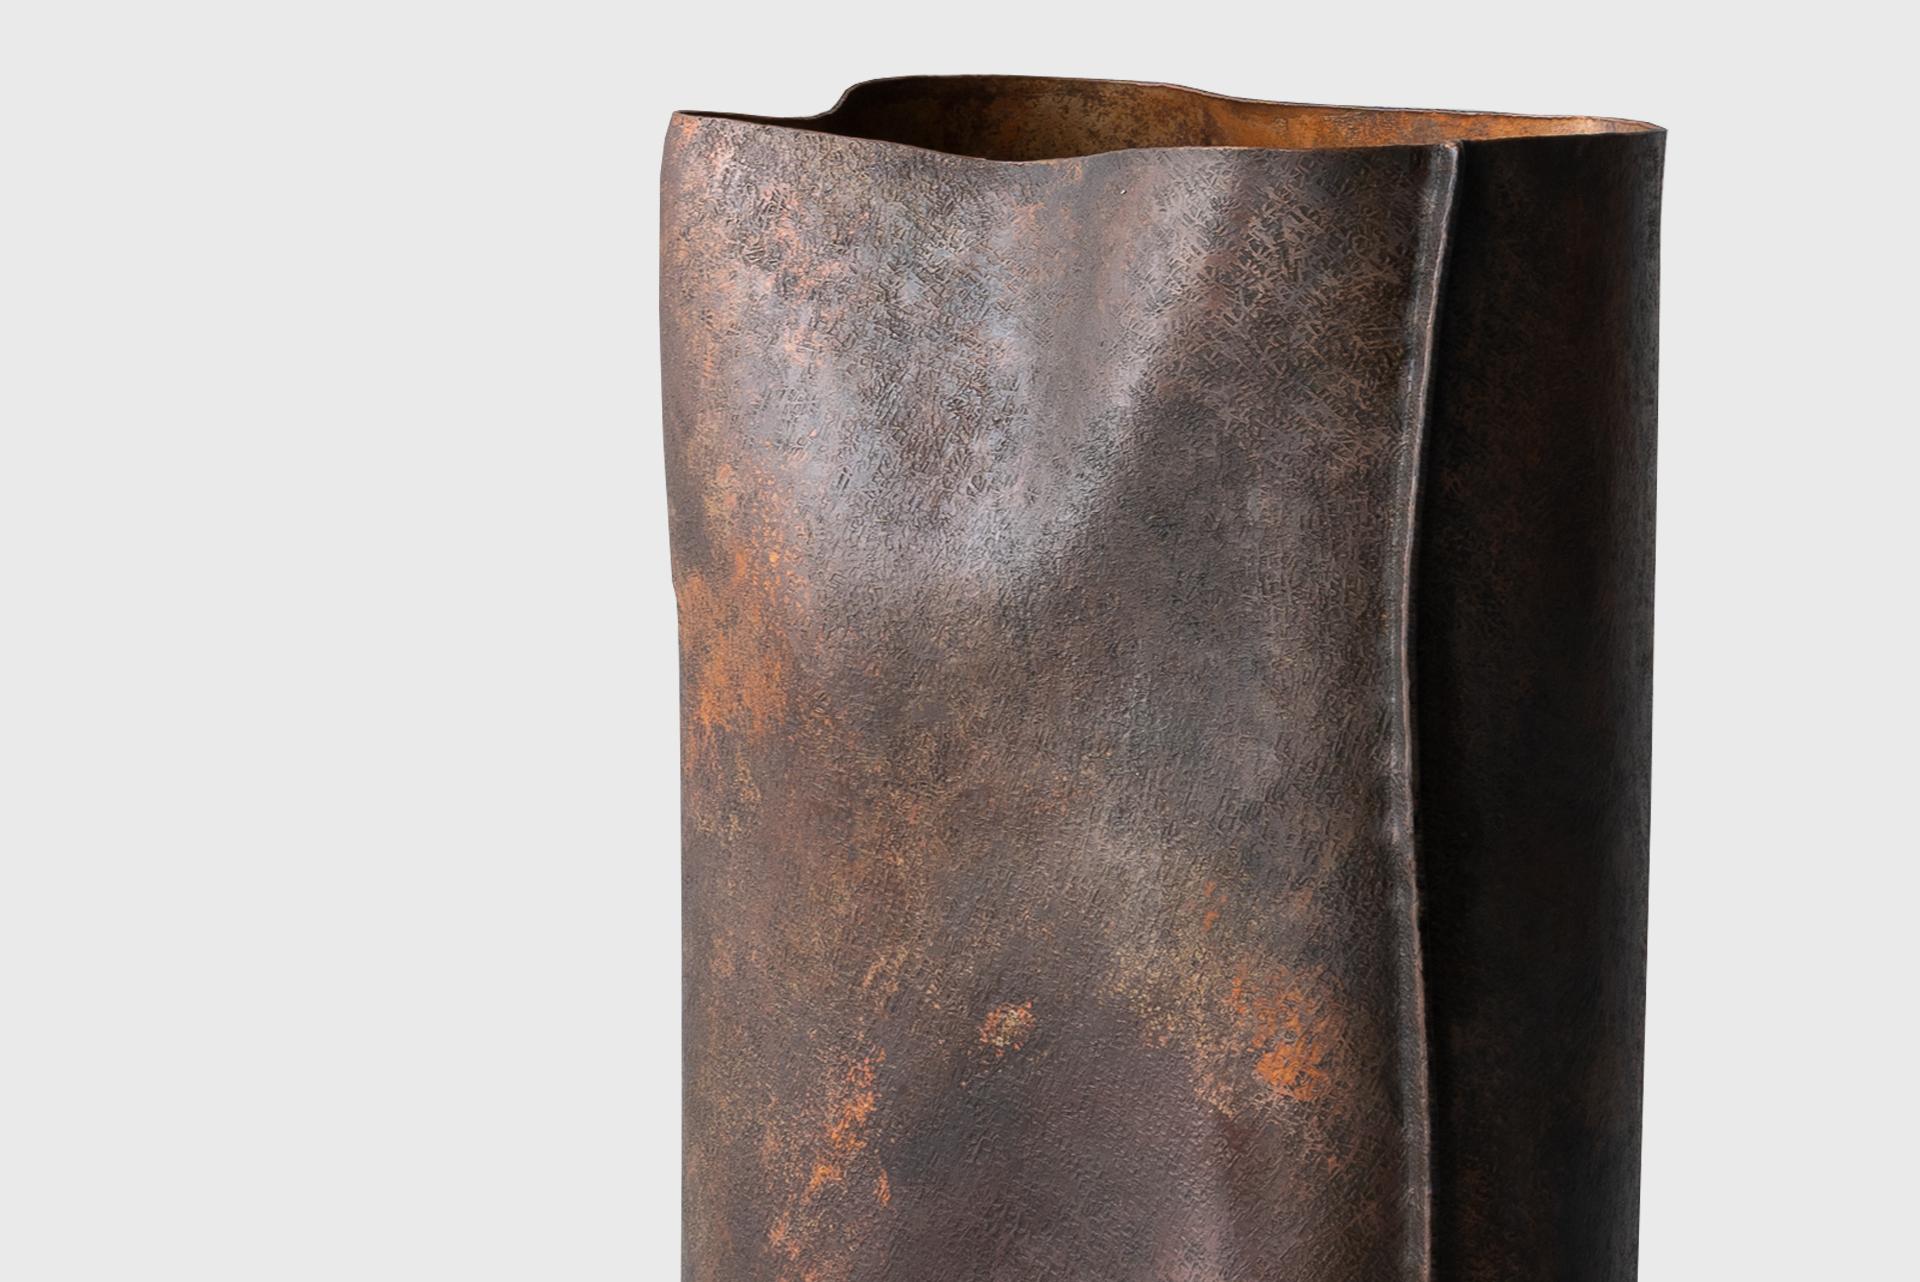 Contemporary Copper Vase 1, Textured Natural Dark Lacquer, Seung Hyun Lee, Korea In New Condition For Sale In Barcelona, ES